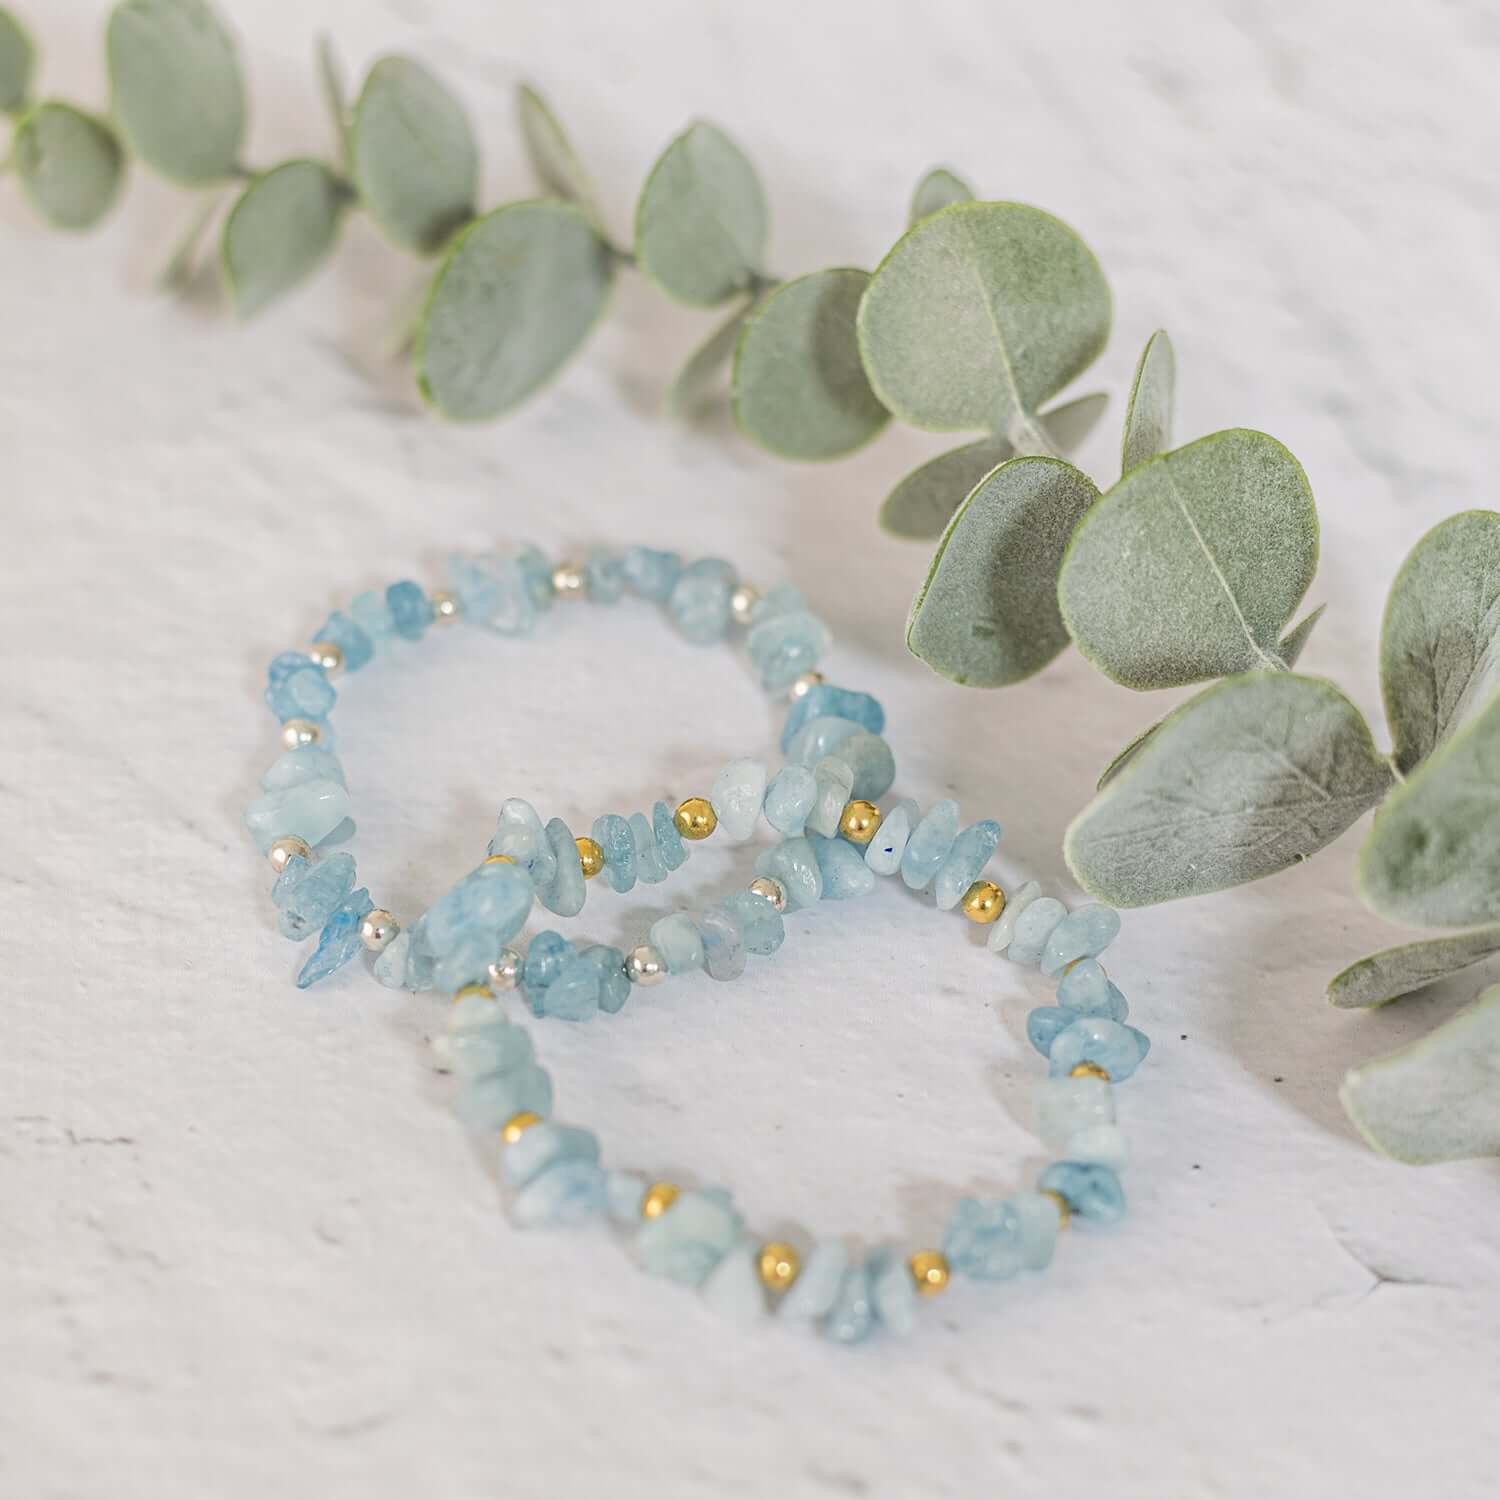  Two aquamarine gemstone bracelets, perfect as birthstone jewellery for March, are adorned with small gold and silver beads. They are displayed on a white surface with fresh green eucalyptus leaves arranged decoratively behind them